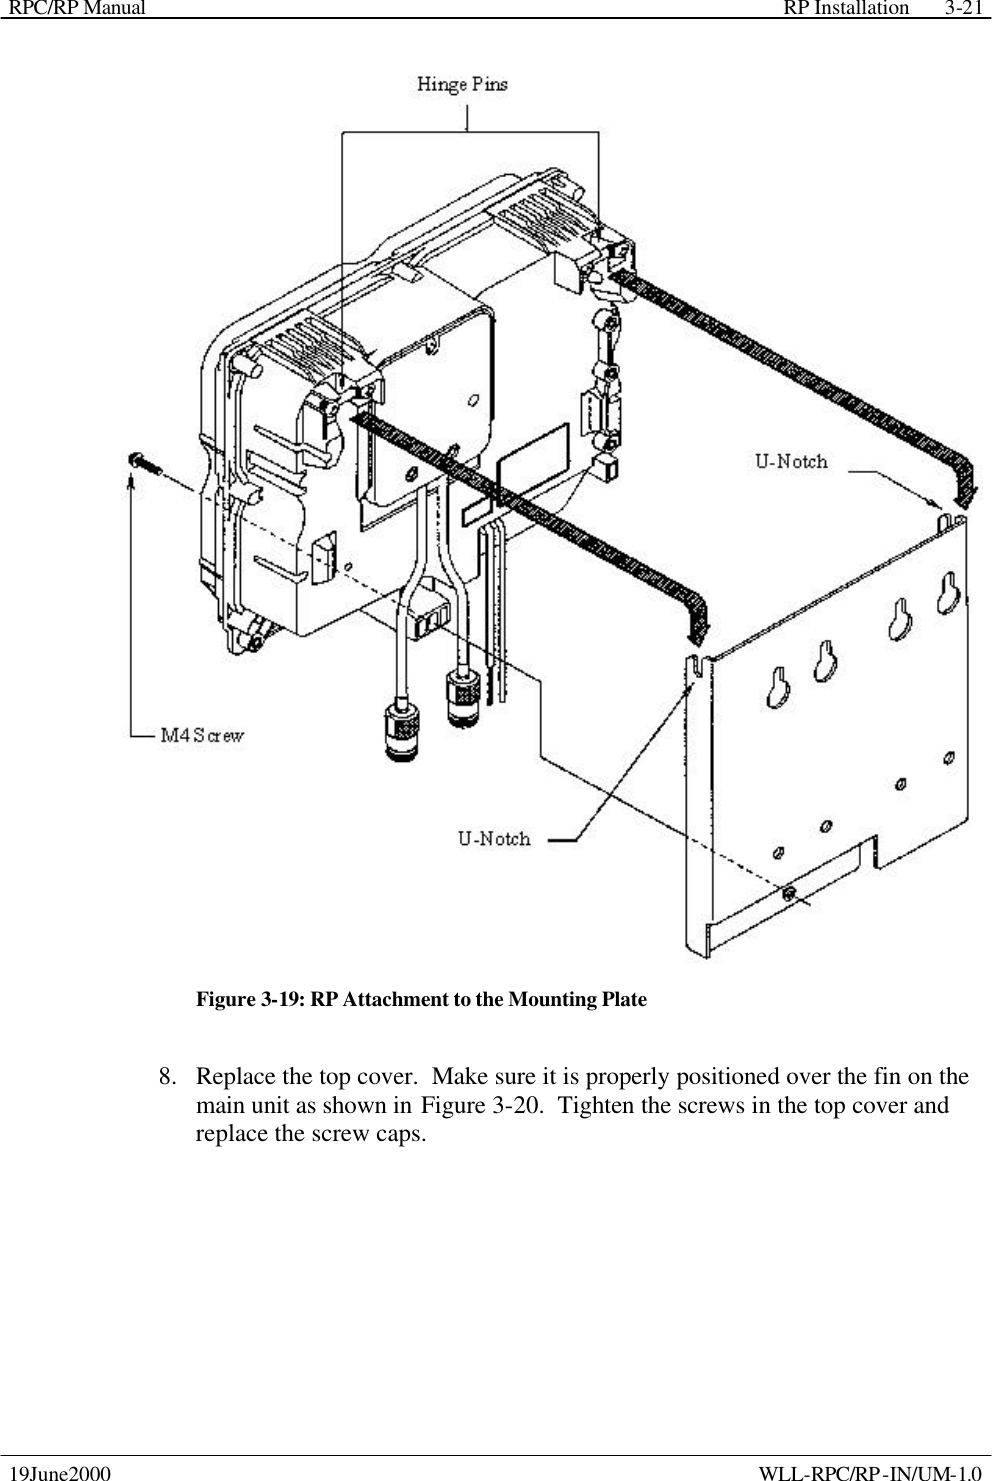 RPC/RP Manual    RP Installation  19June2000    WLL-RPC/RP-IN/UM-1.0 3-21 Figure 3-19: RP Attachment to the Mounting Plate 8.  Replace the top cover.  Make sure it is properly positioned over the fin on the main unit as shown in Figure 3-20.  Tighten the screws in the top cover and replace the screw caps. 